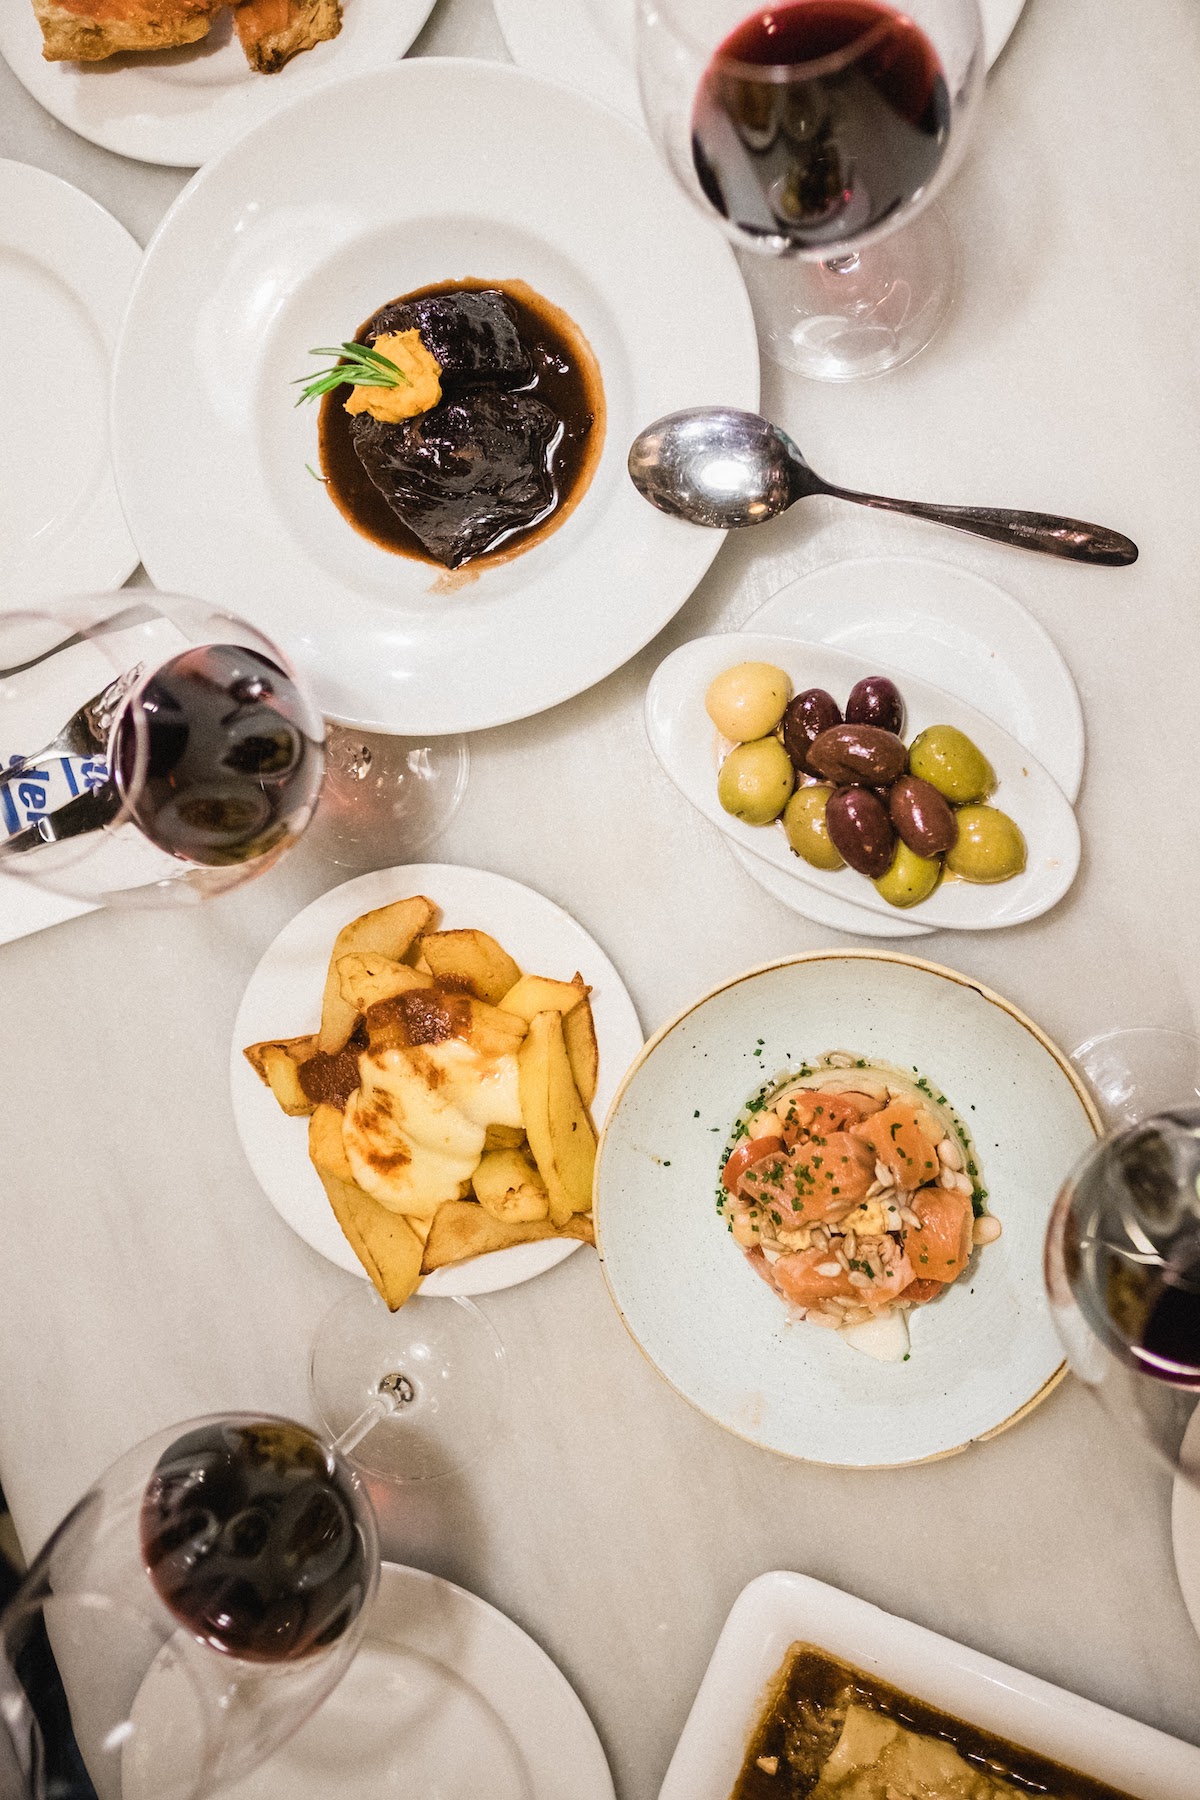 Overhead shot of various small plates of food and glasses of red wine on a white tabletop.